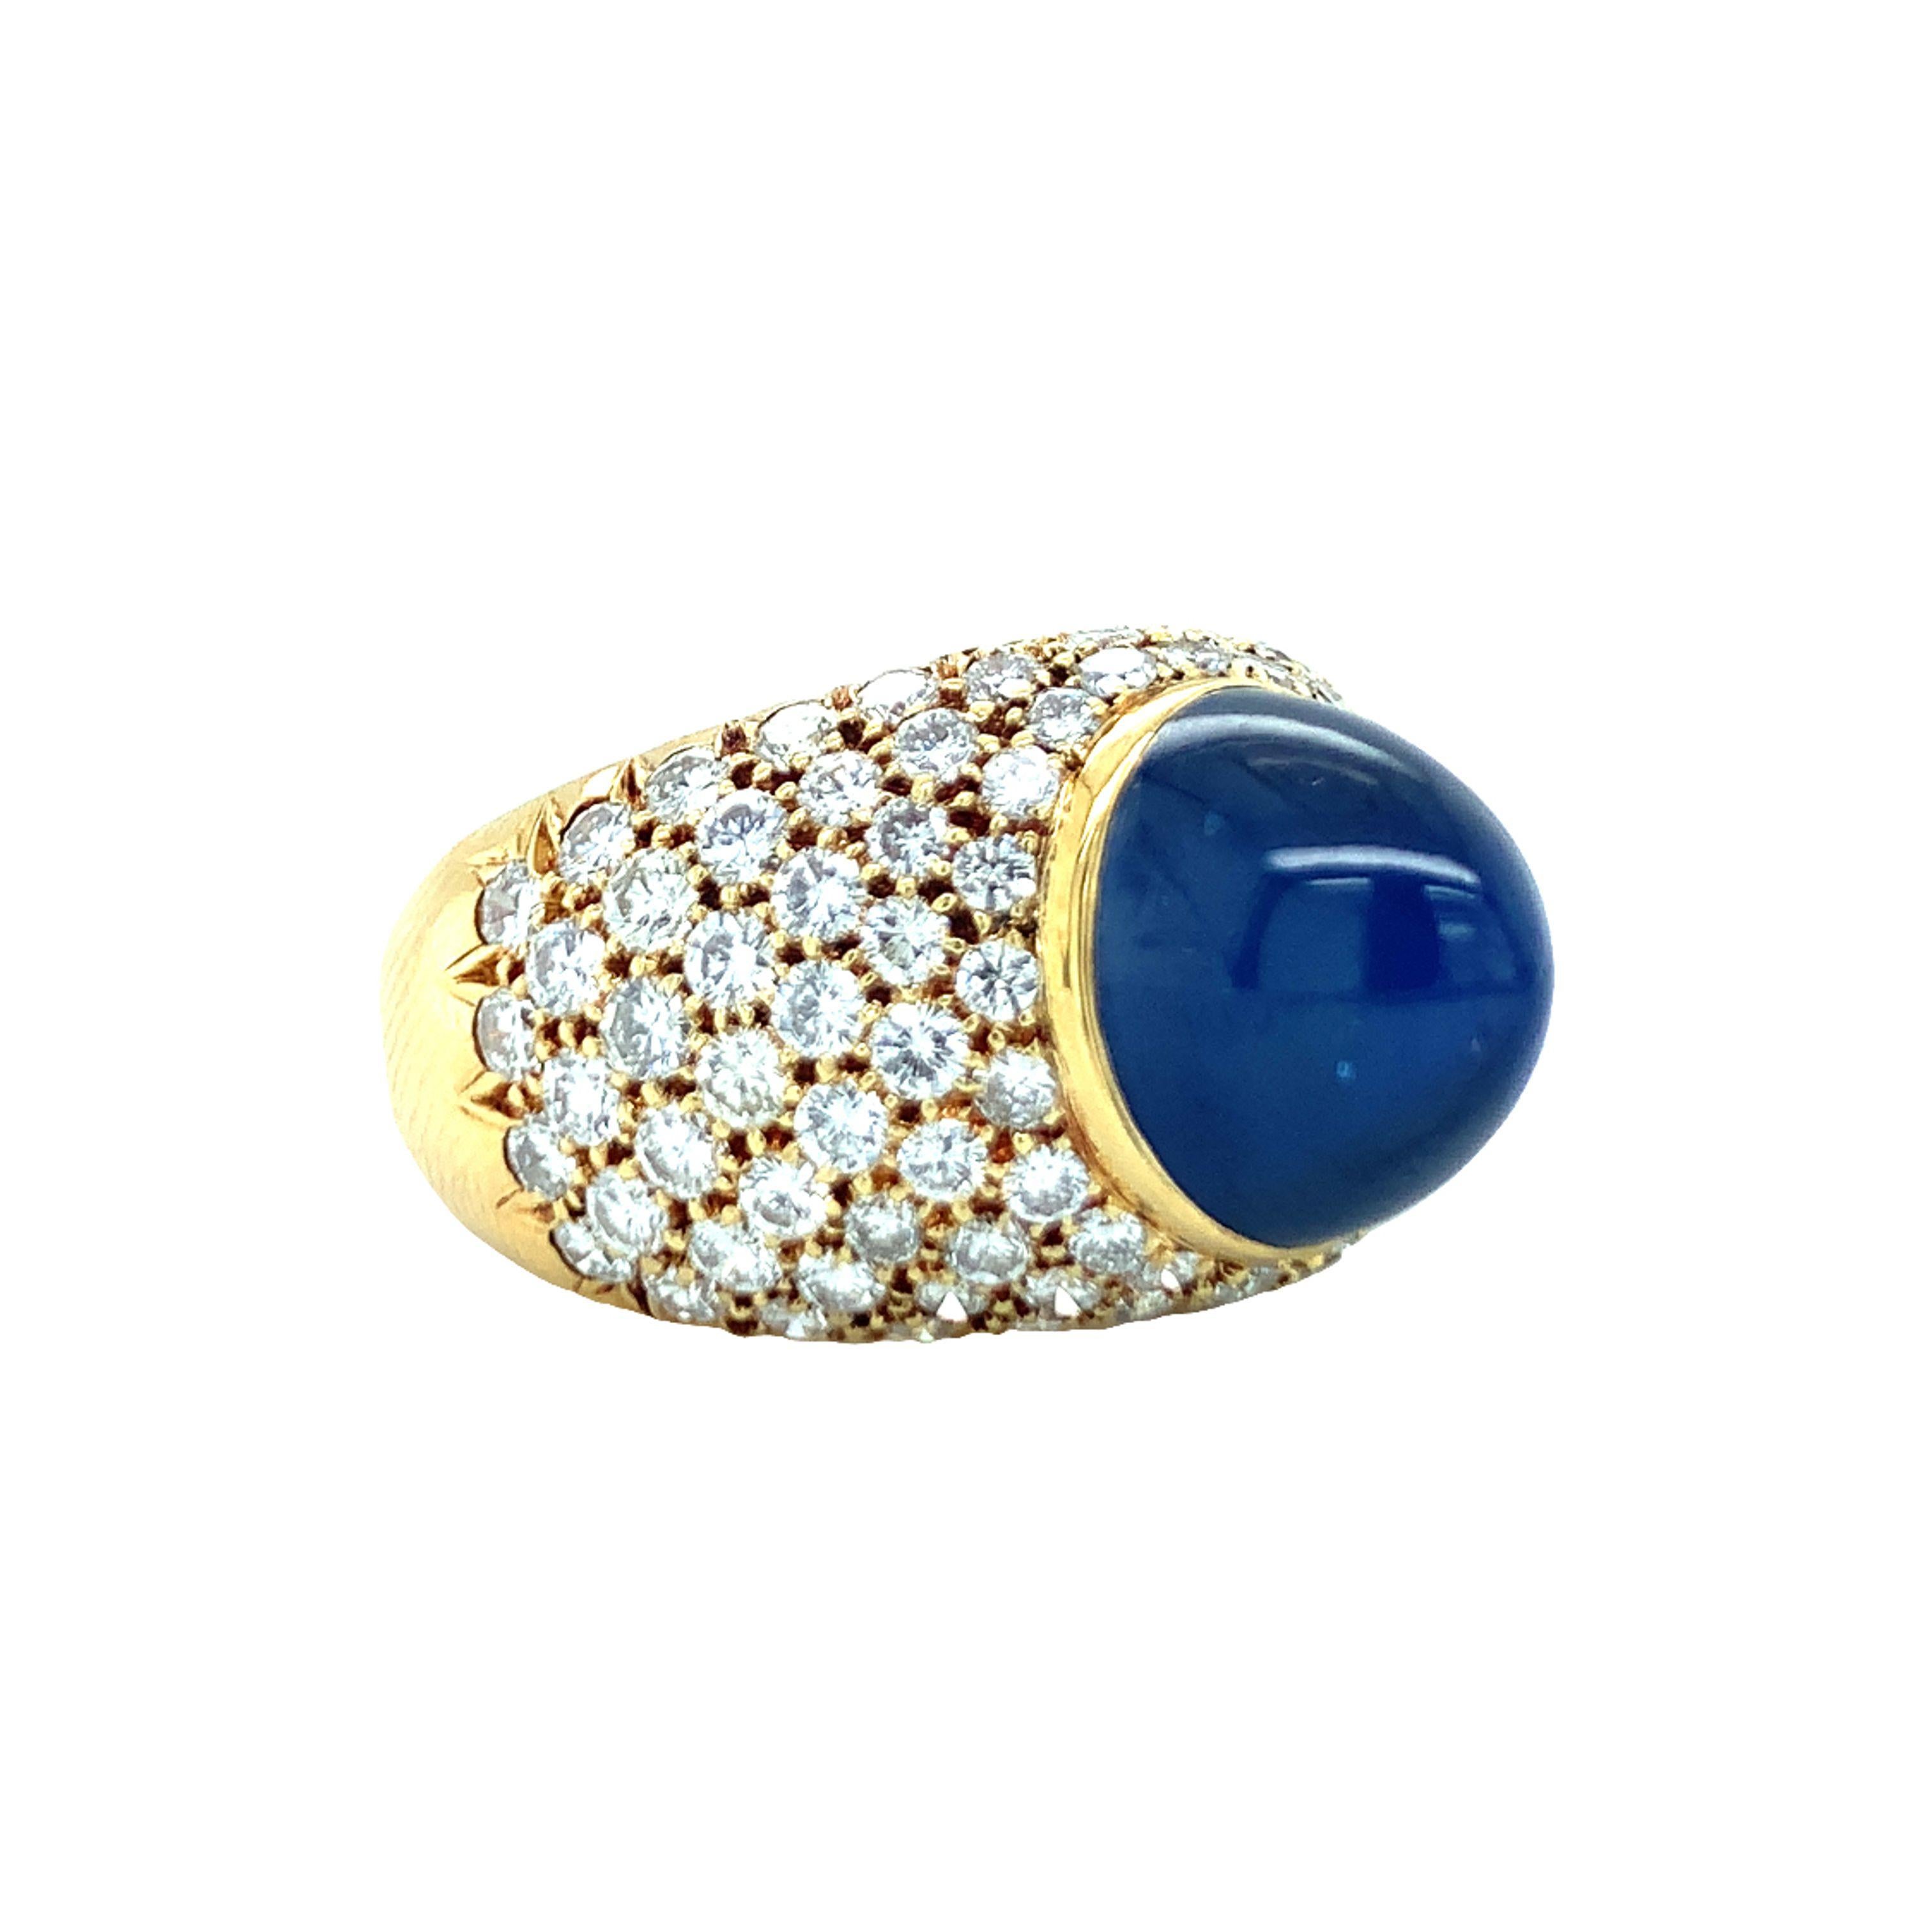 One sapphire and diamond 18K yellow gold ring centering one high dimension, oval sugarloaf cabochon cut blue sapphire weighing 10 ct. The ring is further accented by 98 pave set, round brilliant cut diamonds weighing a total of 3 ct. with G color